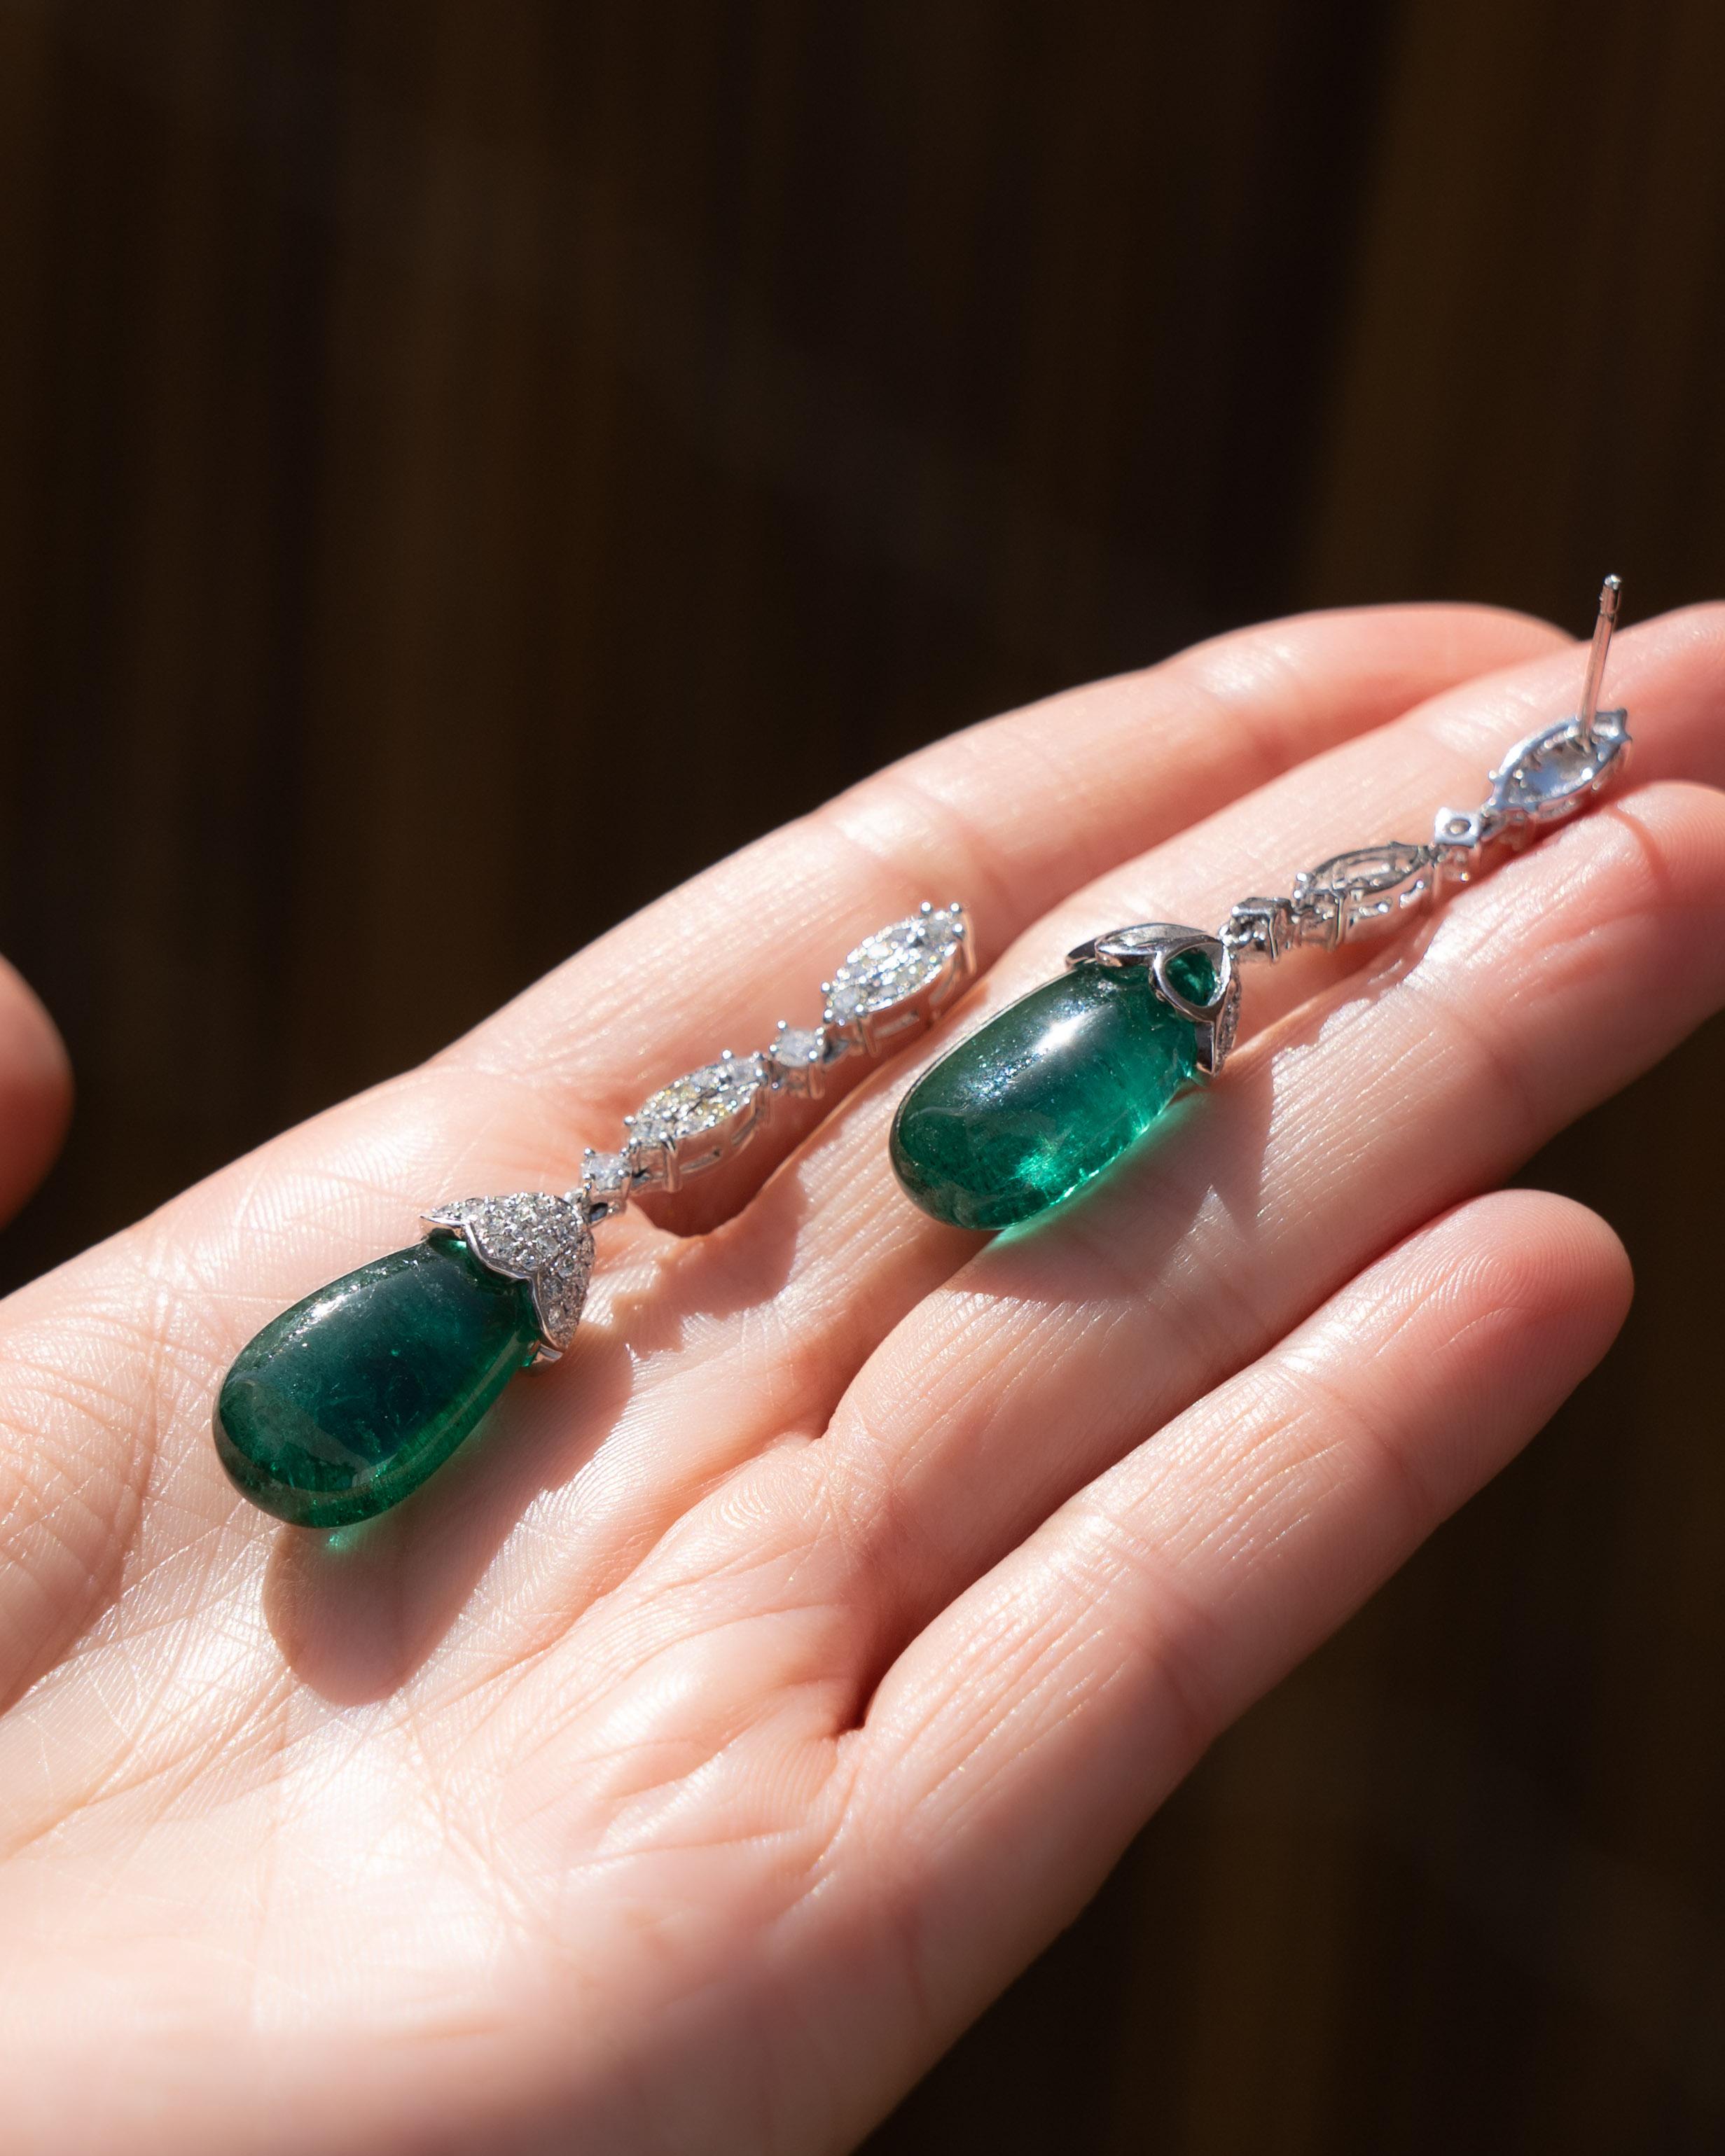 Exquisite pair of Emerald drop earrings crafted in 18 karat white gold and featuring approximately 1.21 carats of fine white diamonds ( G / VS2 ) and 29.59 carats carats of vivid green emeralds. The earrings radiate with feminine elegance and